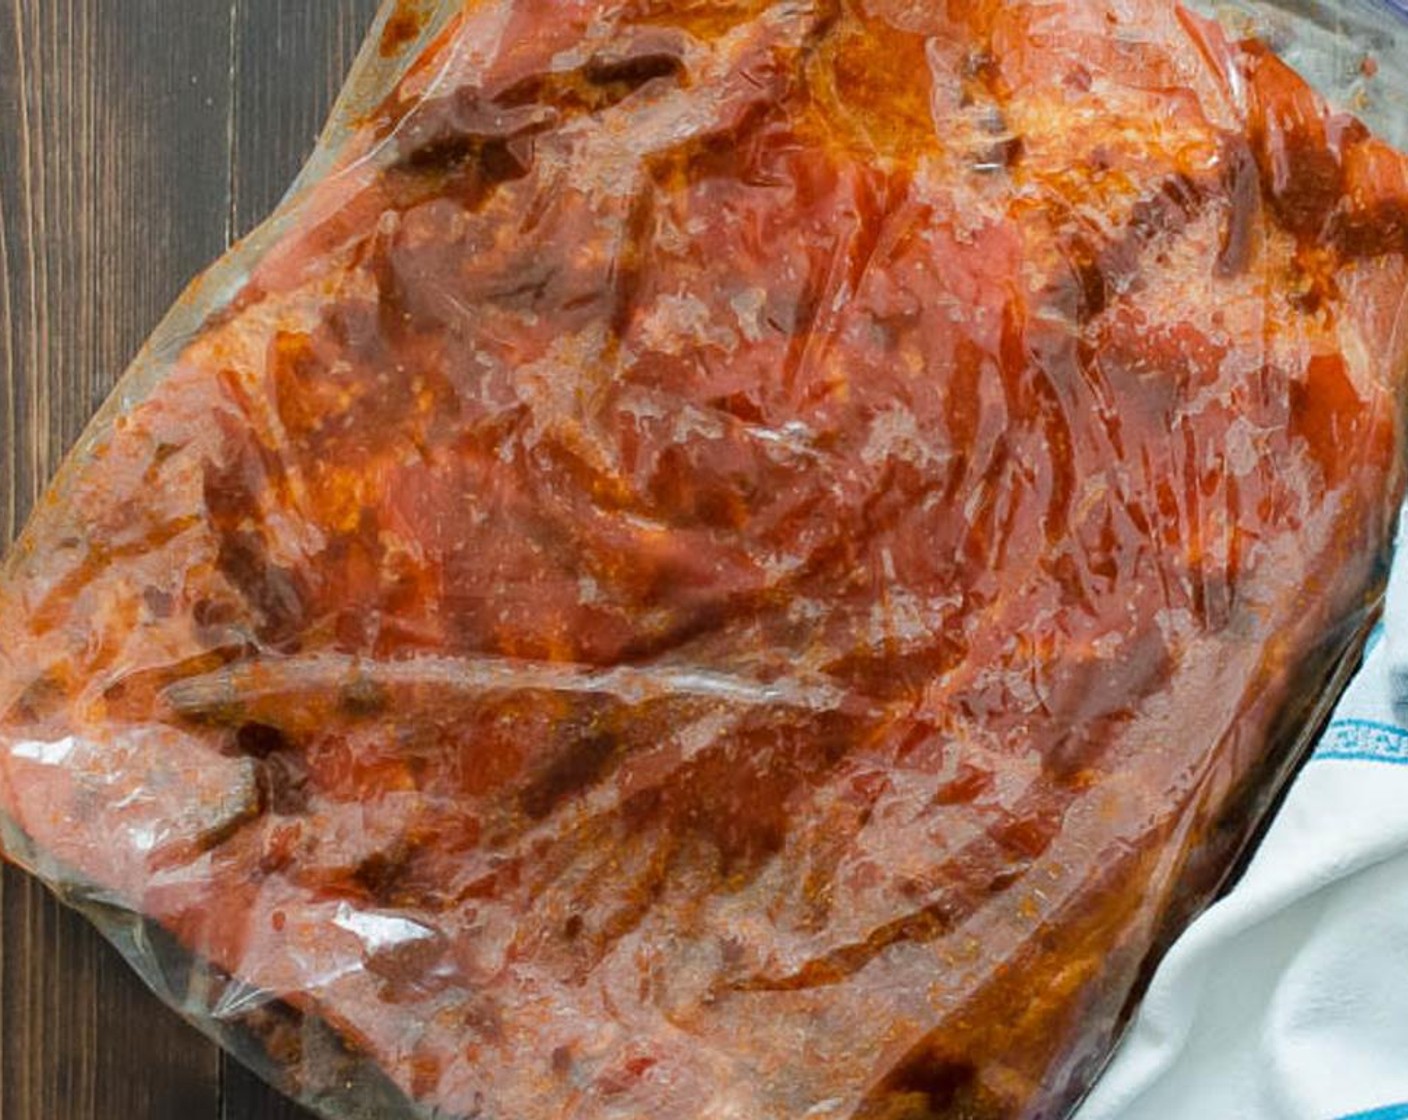 step 3 Place the belly in the plastic bag and add half of the curing mixture to the top of the belly. Use your hands to rub it into the flesh, evenly coating. Flip over and rub the remaining curing mix onto the other side of the pork belly.